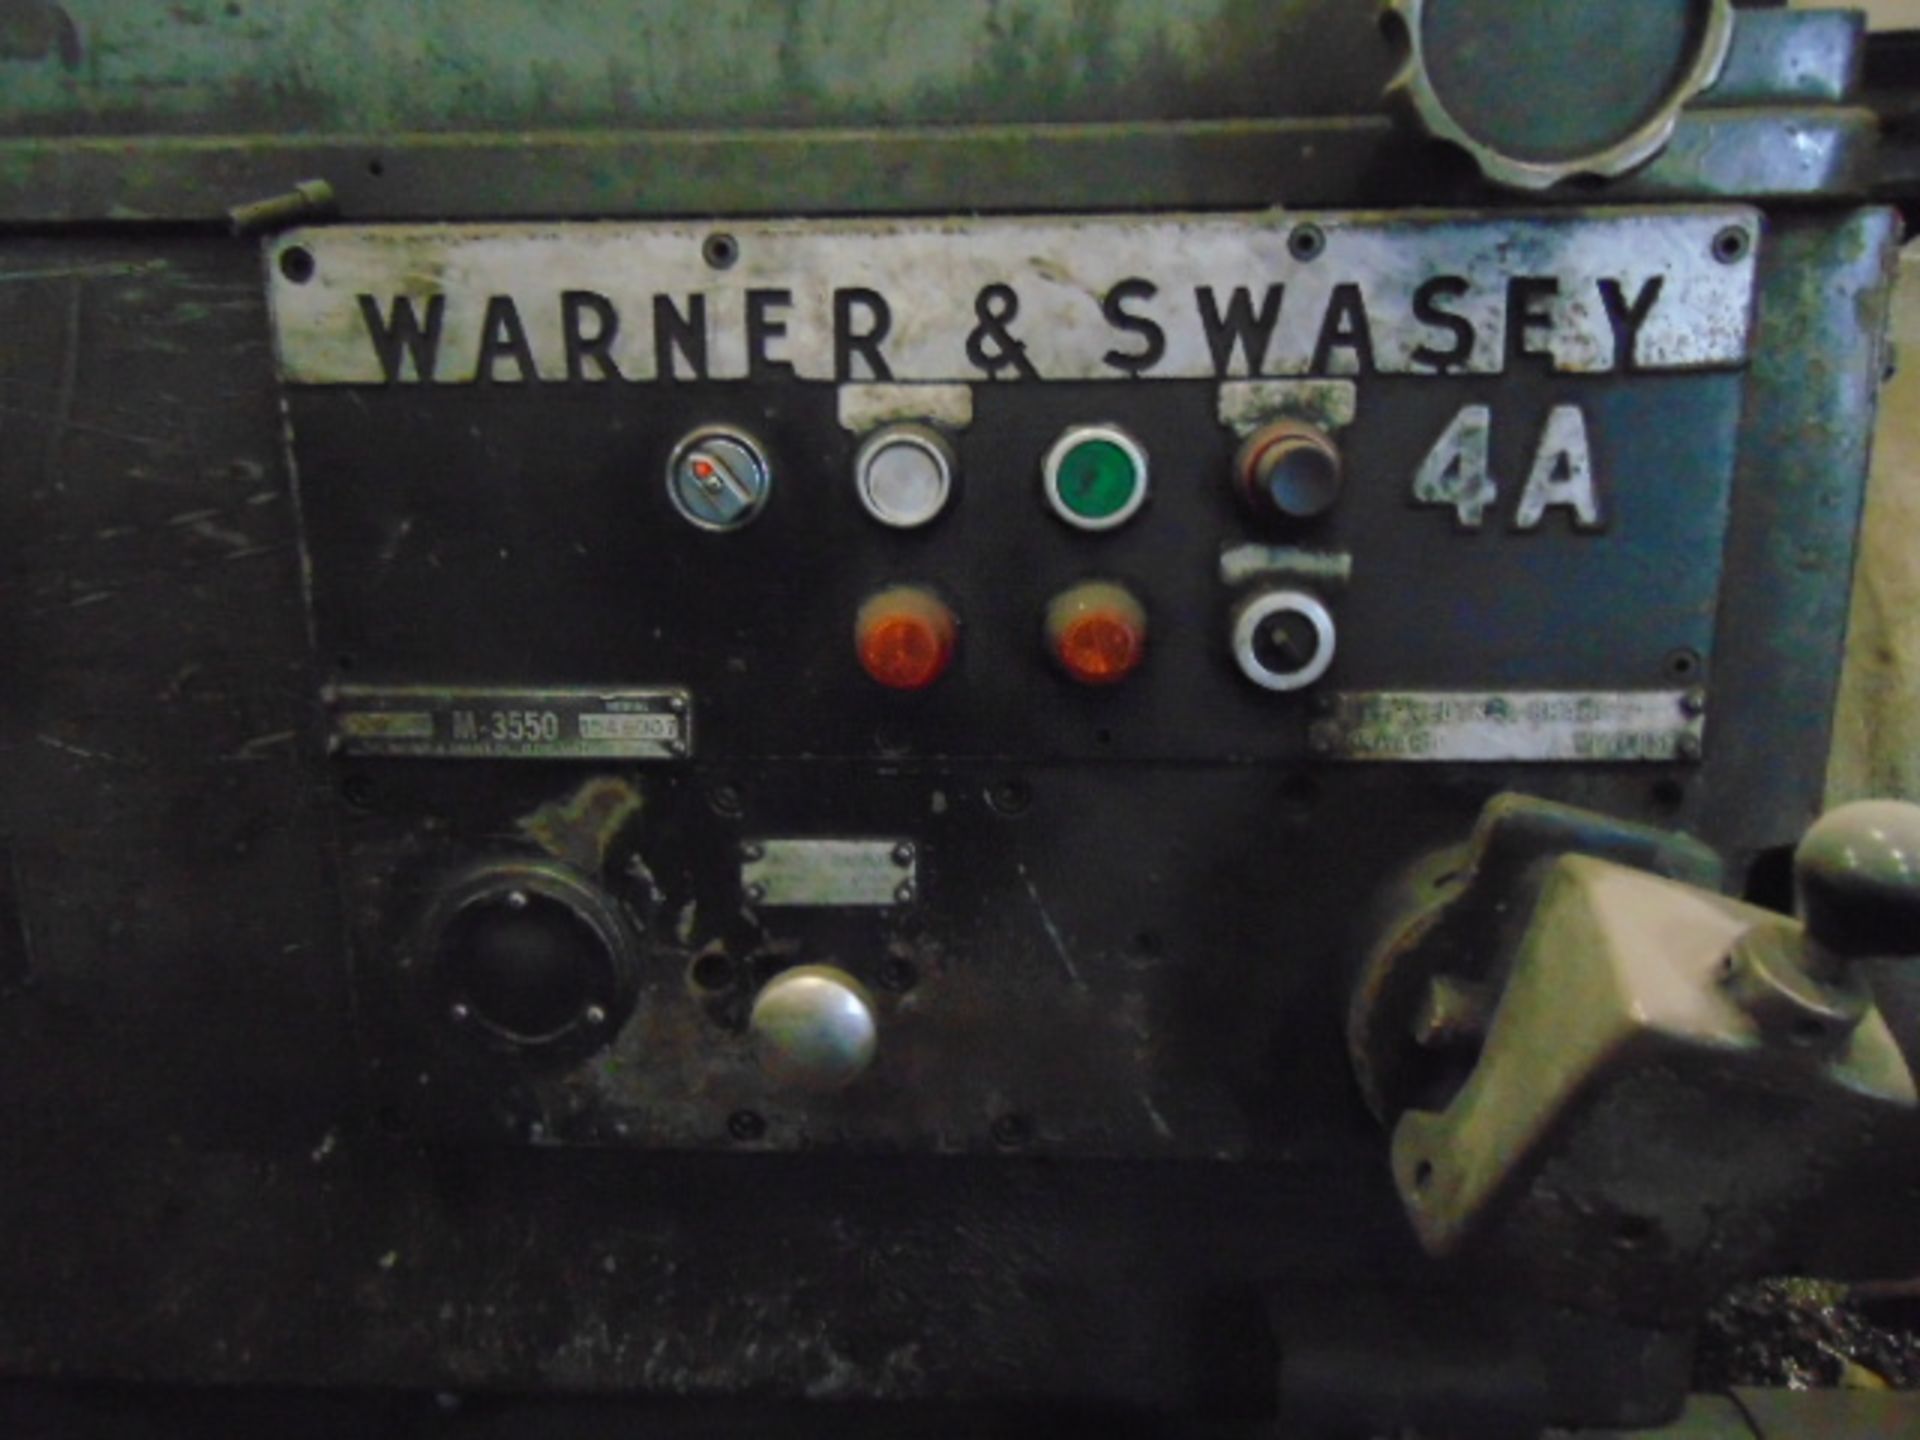 TURRET LATHE, WARNER & SWASEY MDL. 4A M-3350, S/N 1546007(Located at: Machine Station, 601 McFarland - Image 8 of 18